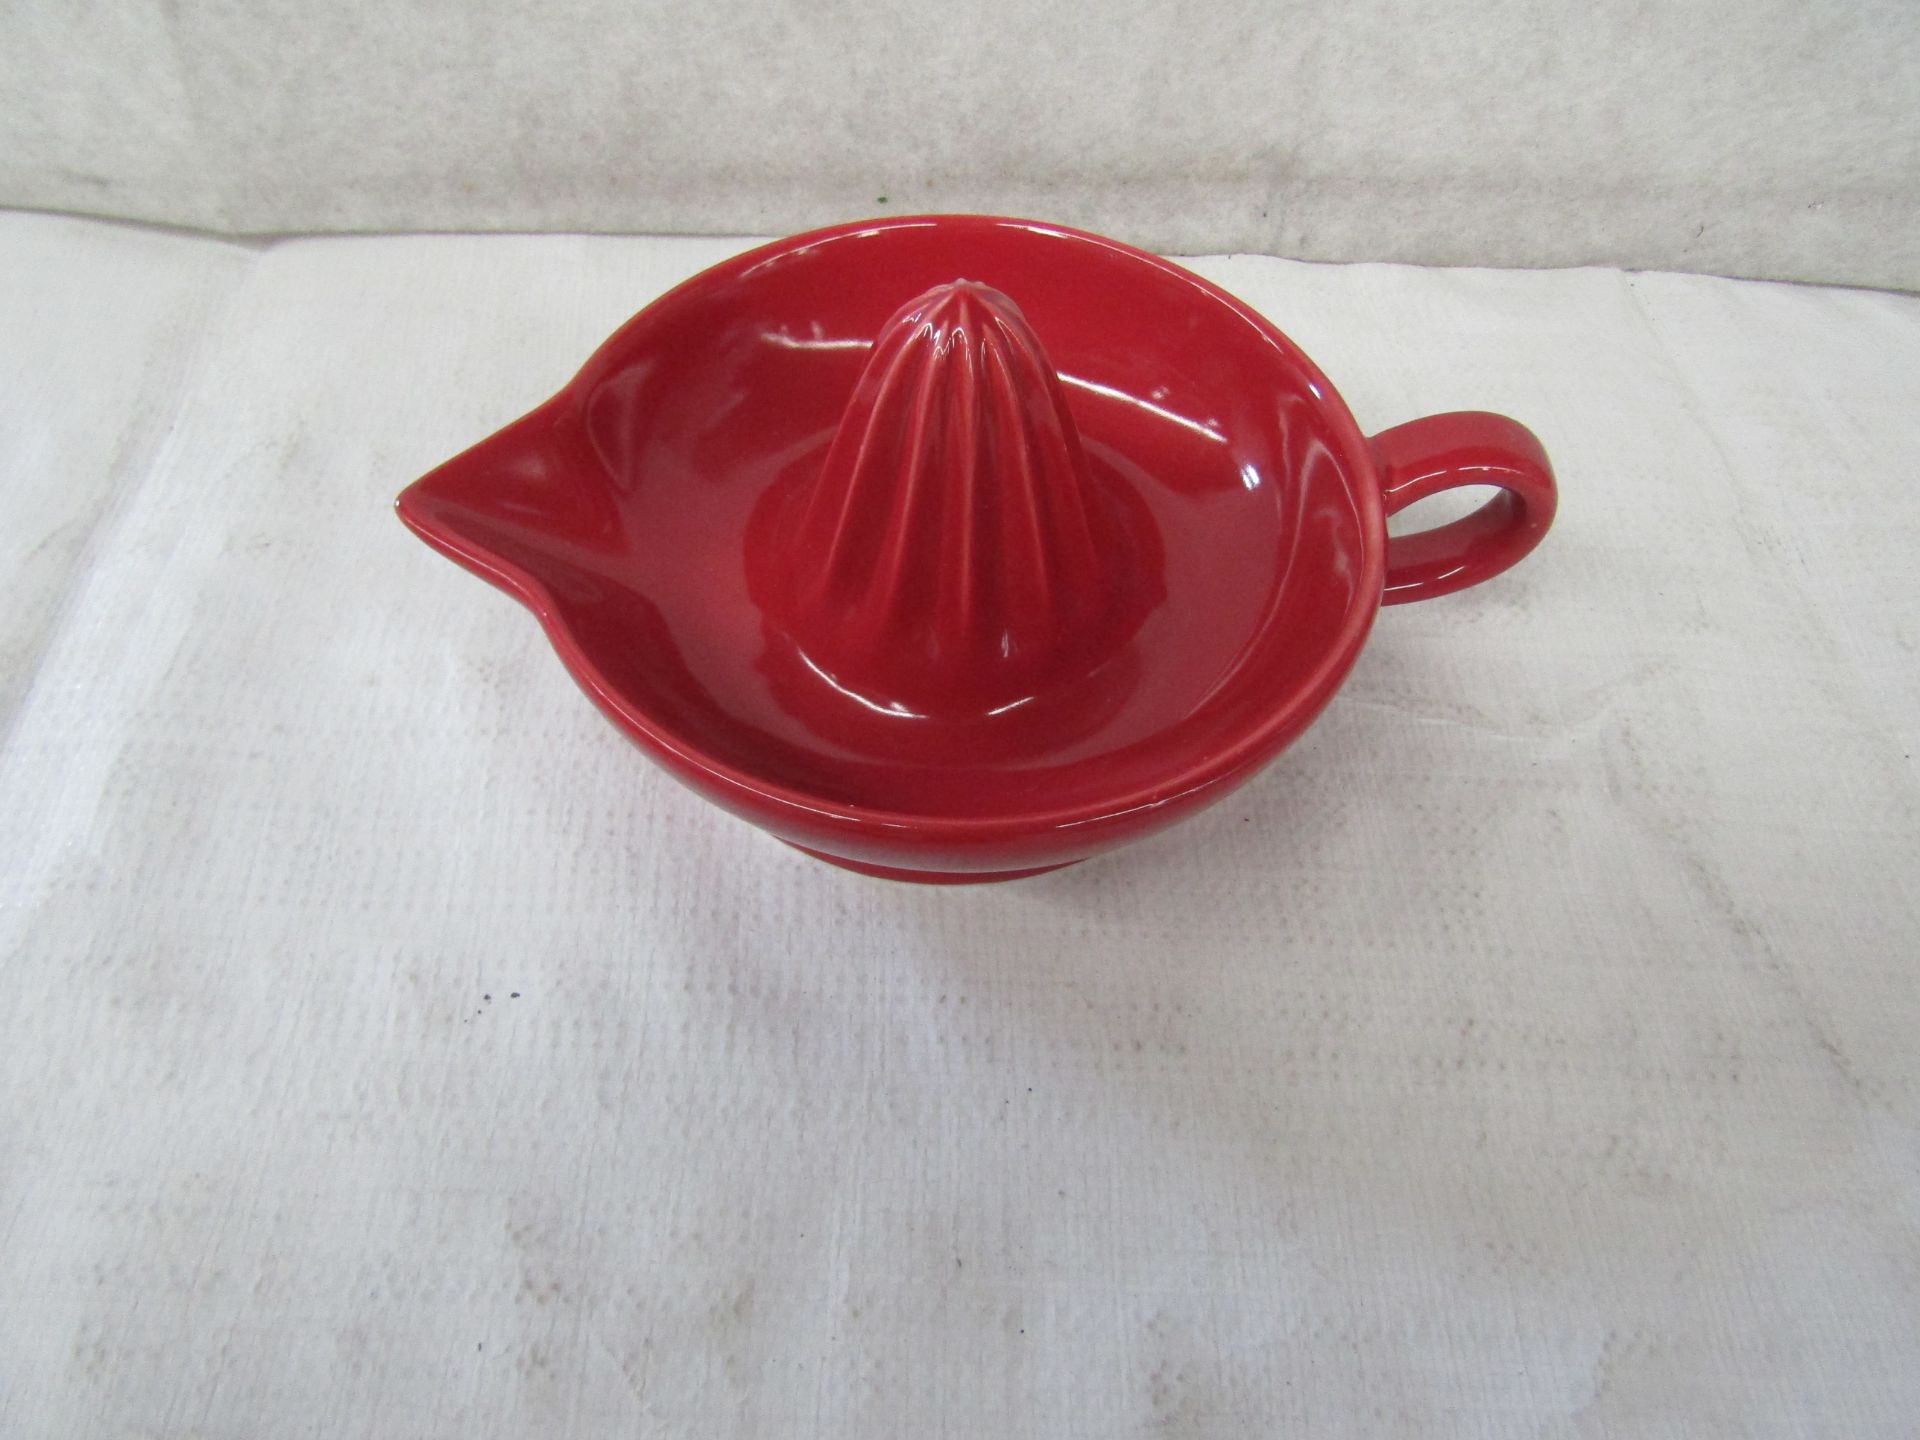 Scoop - Red Large Citrus Juicer - New & Boxed.